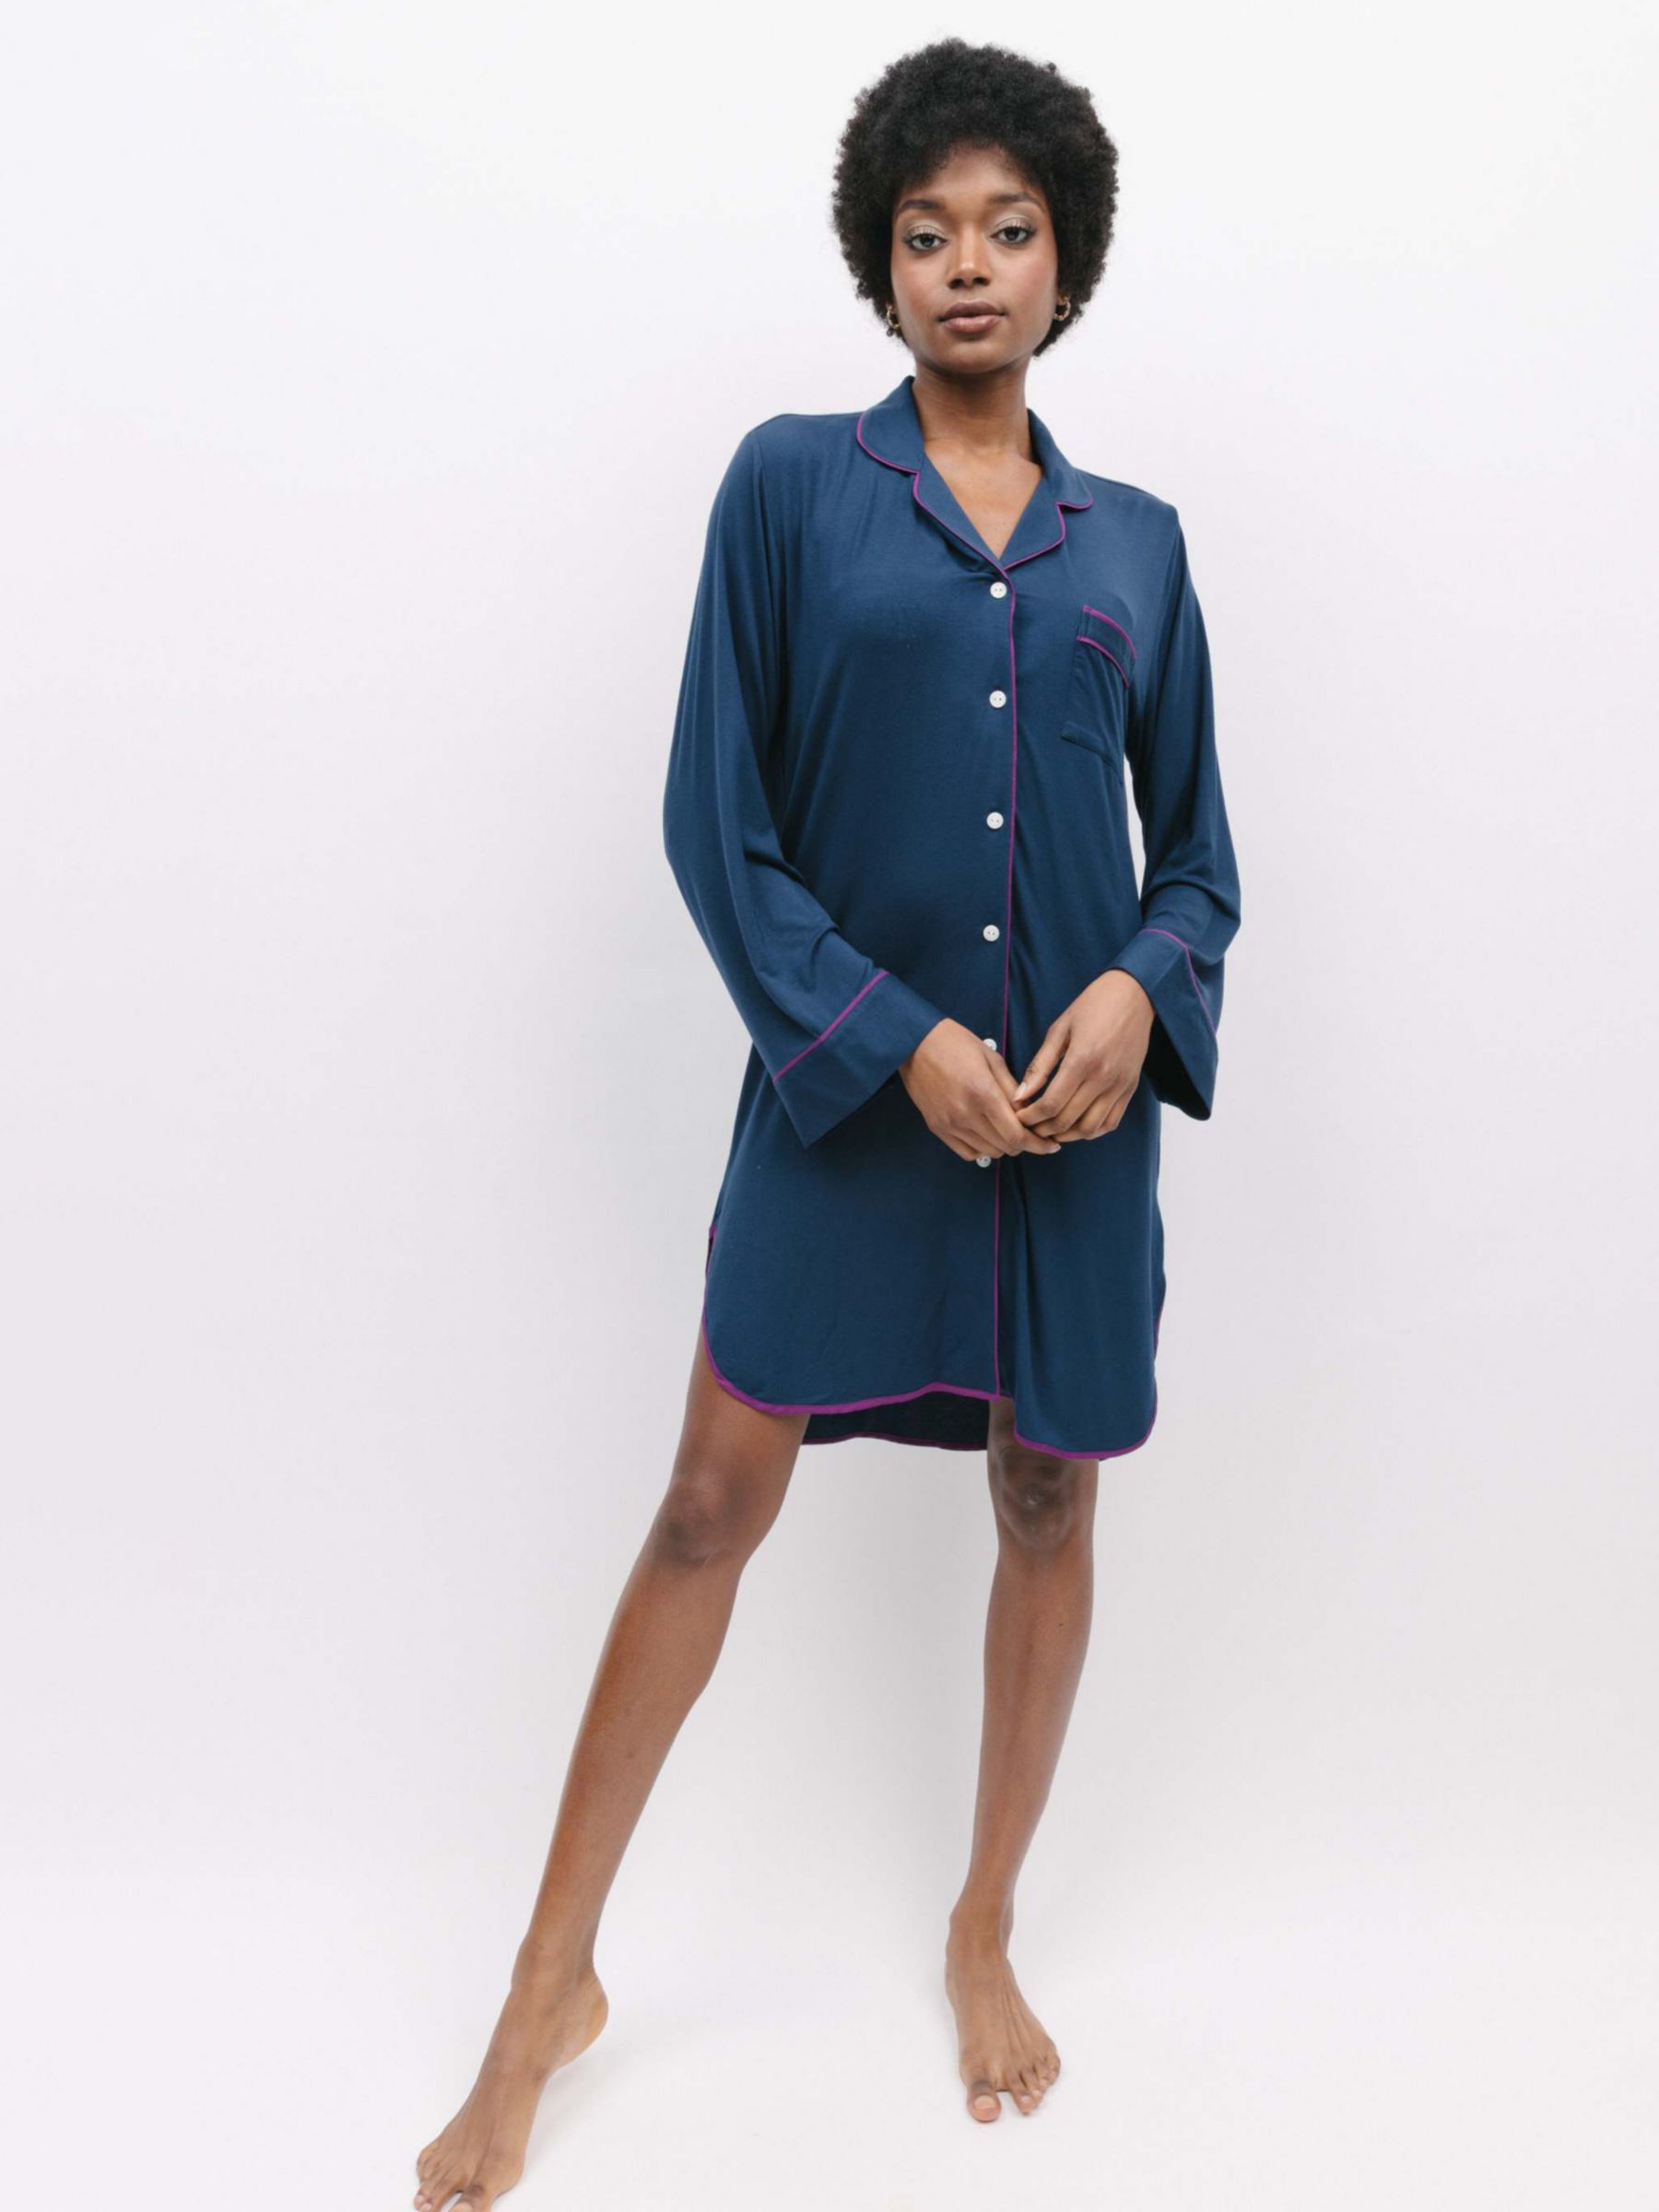 Buy Fable & Eve Southbank Knitted Long Sleeve Nightshirt, Navy Online at johnlewis.com